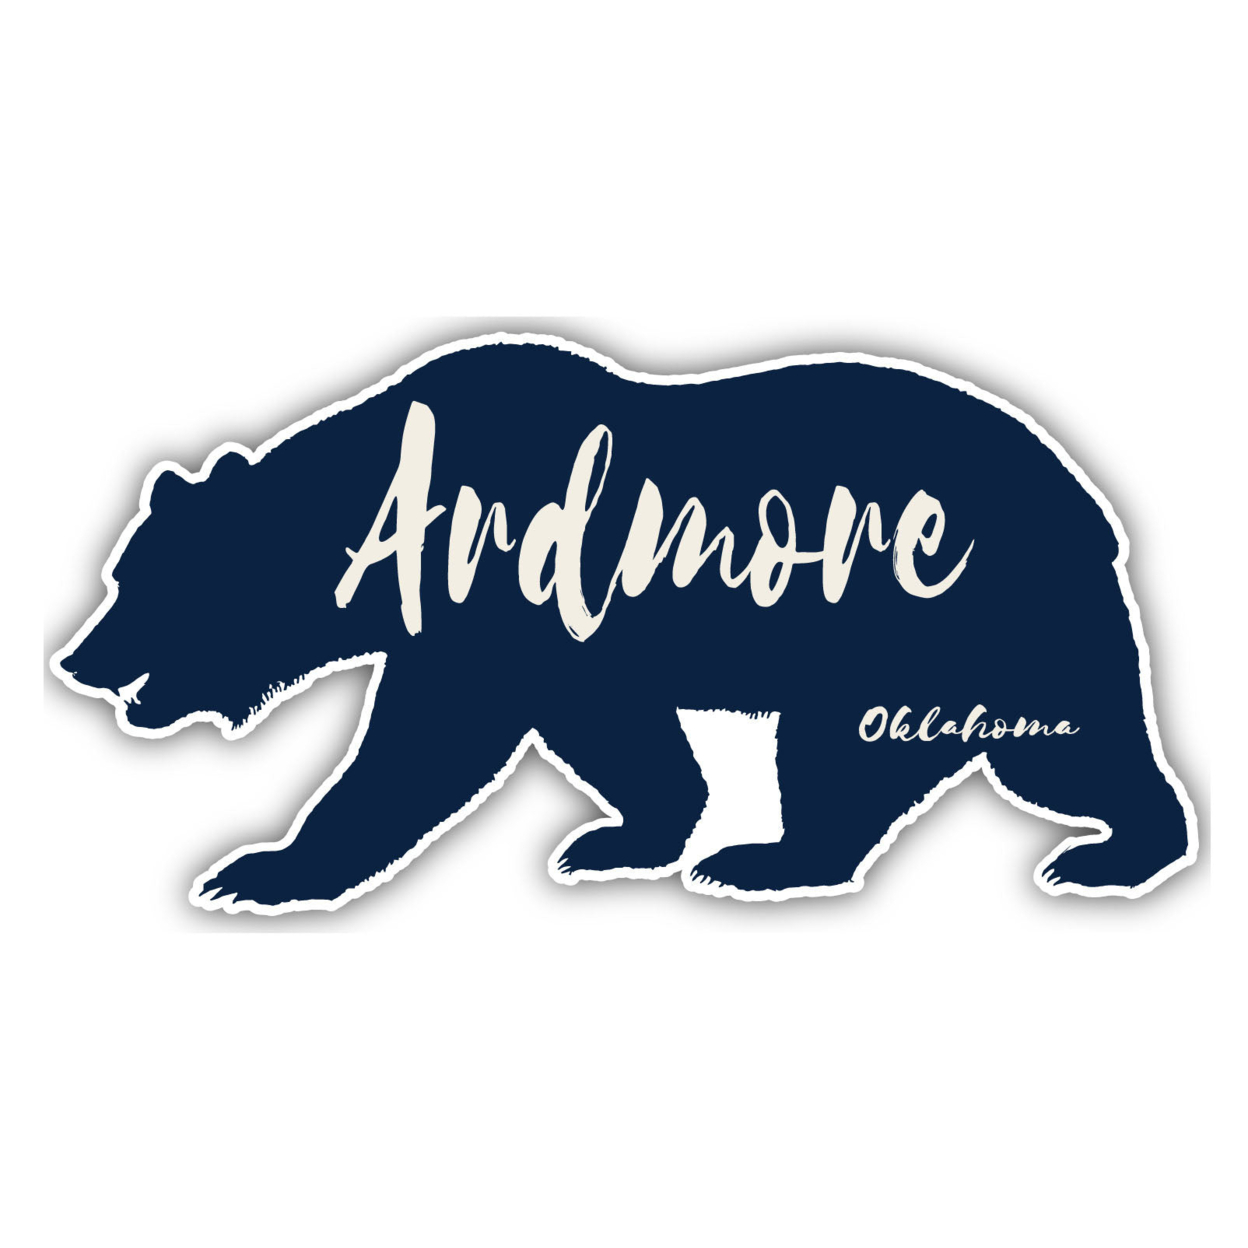 Ardmore Oklahoma Souvenir Decorative Stickers (Choose Theme And Size) - 4-Pack, 10-Inch, Bear